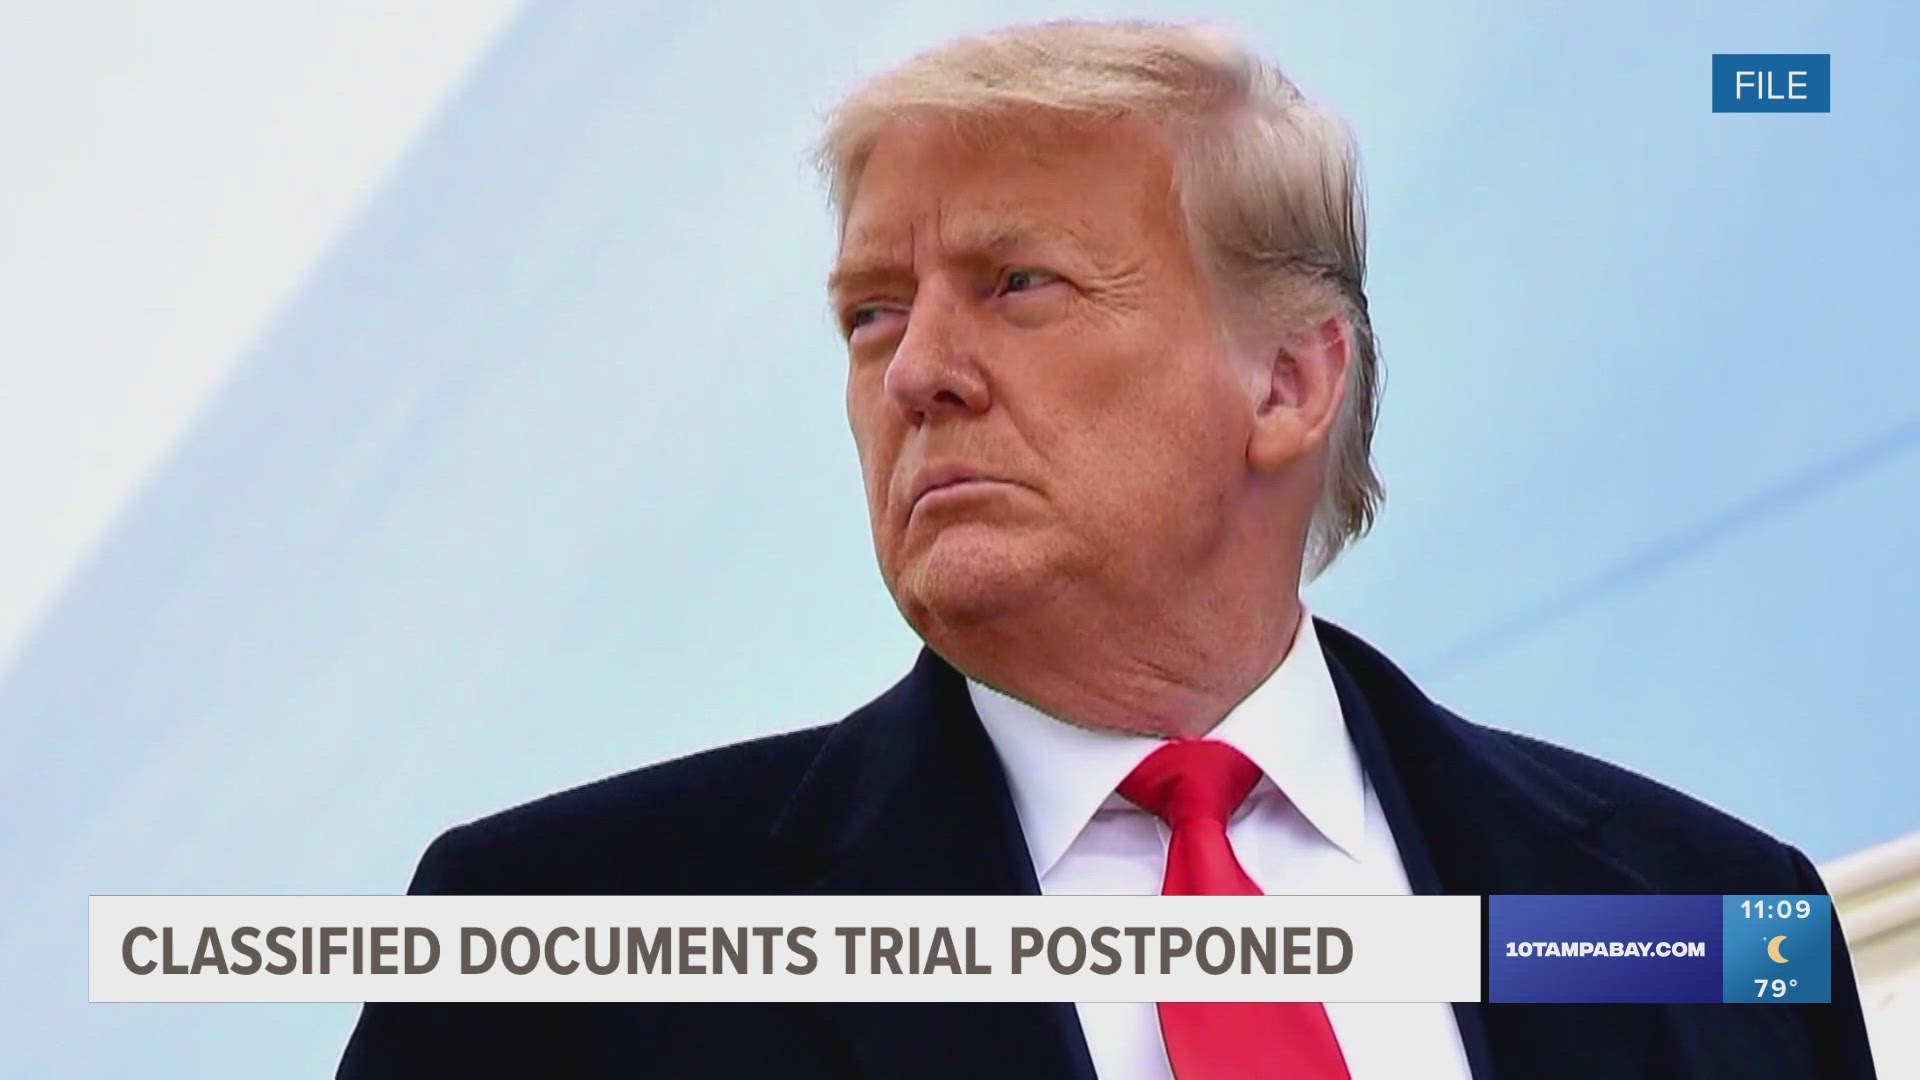 Trump faces four criminal cases, but outside of the New York hush money trial underway, it's not clear that any others will reach trial before the election.